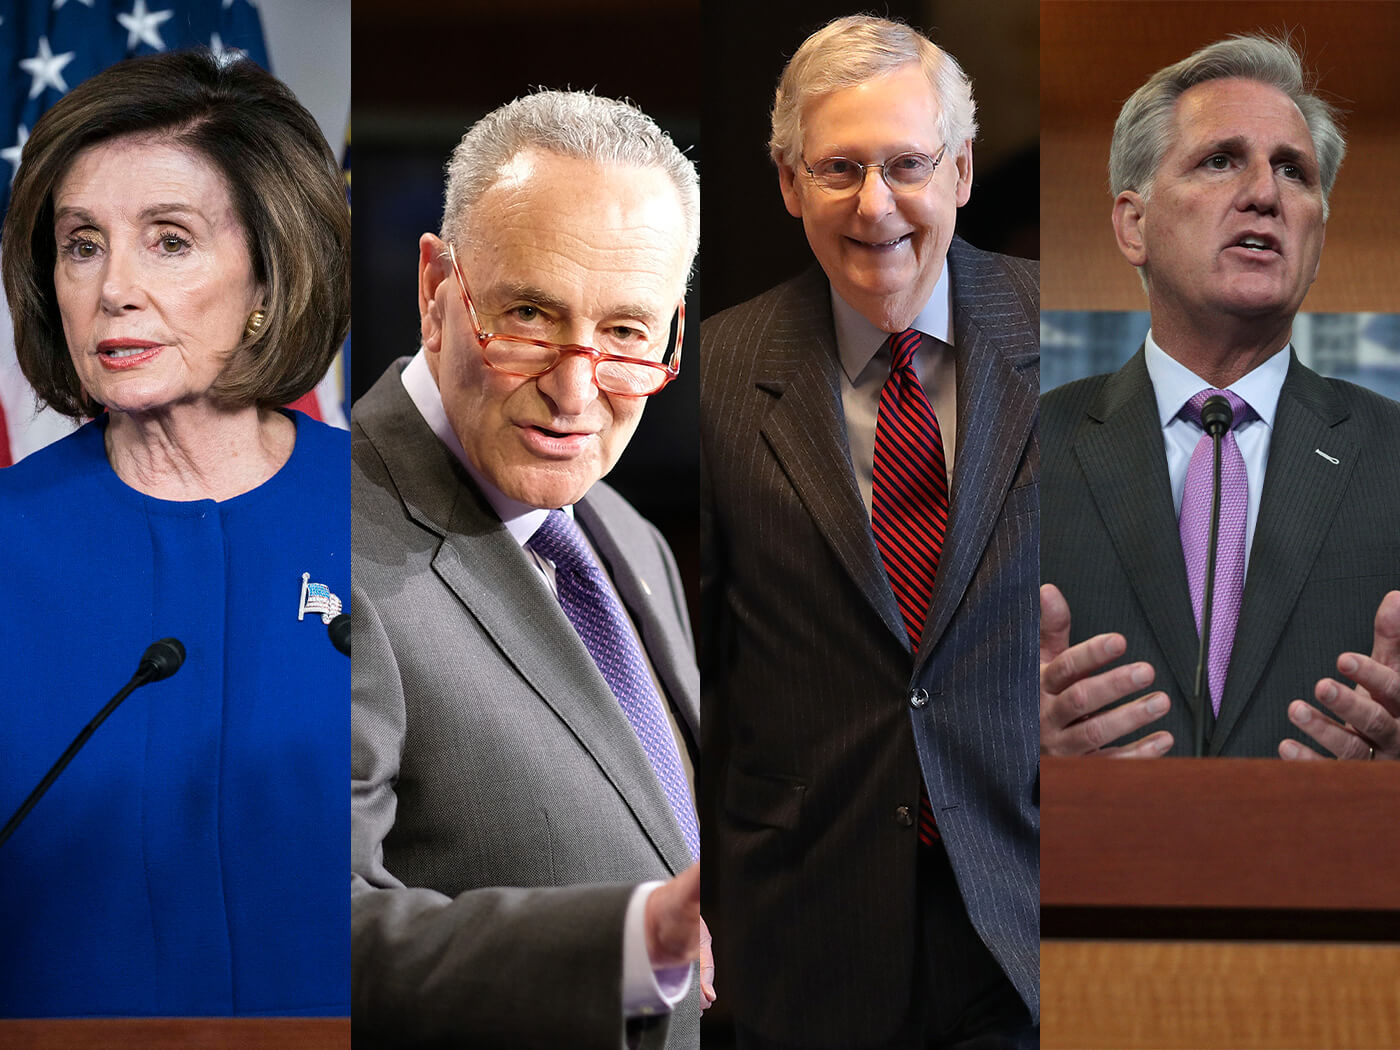 The letter's addressees. L-R: Speaker of the House Nancy Pelosi, Senate Democratic leader Chuck Schumer, Senate Majority Leader Mitch McConnell and House Minority Leader Kevin McCarthy.